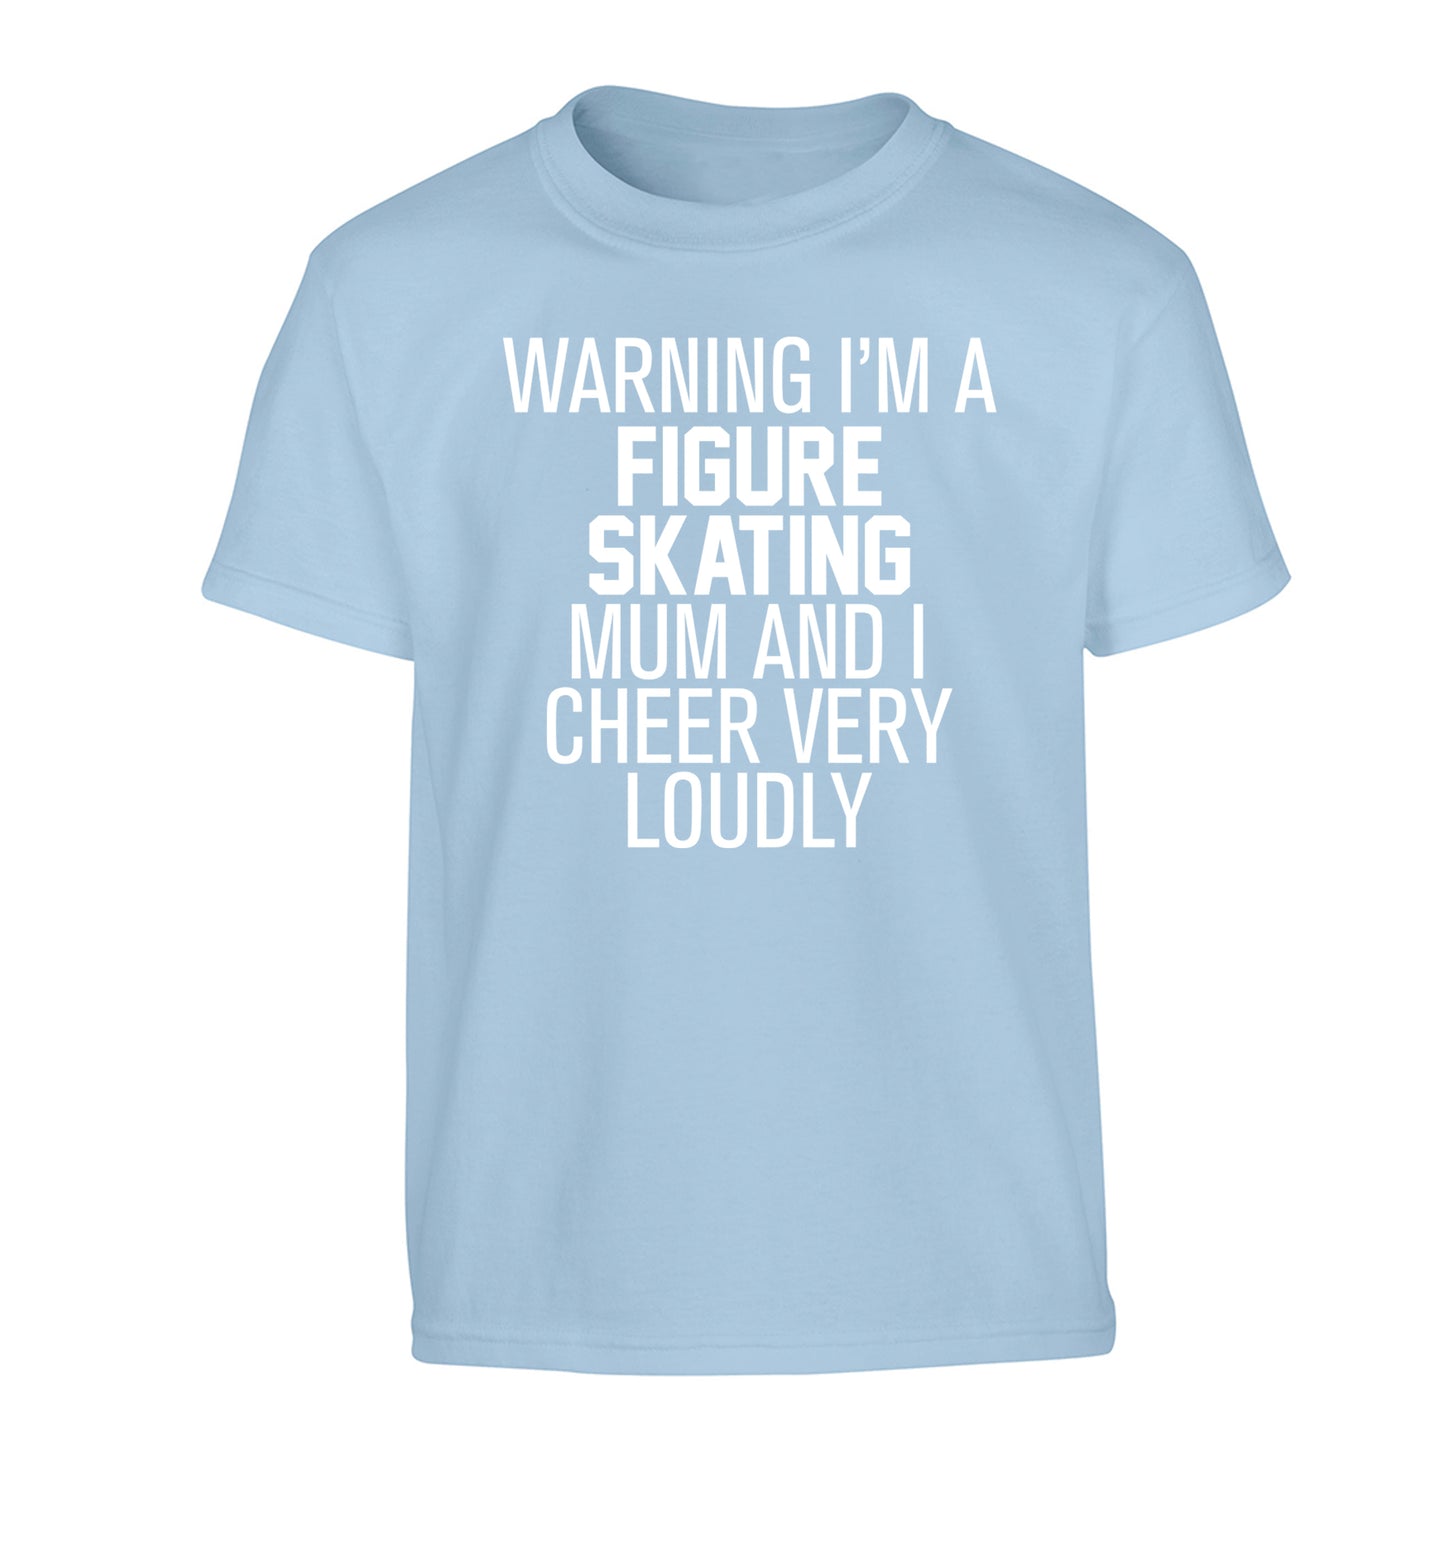 Warning I'm a figure skating mum and I cheer very loudly Children's light blue Tshirt 12-14 Years